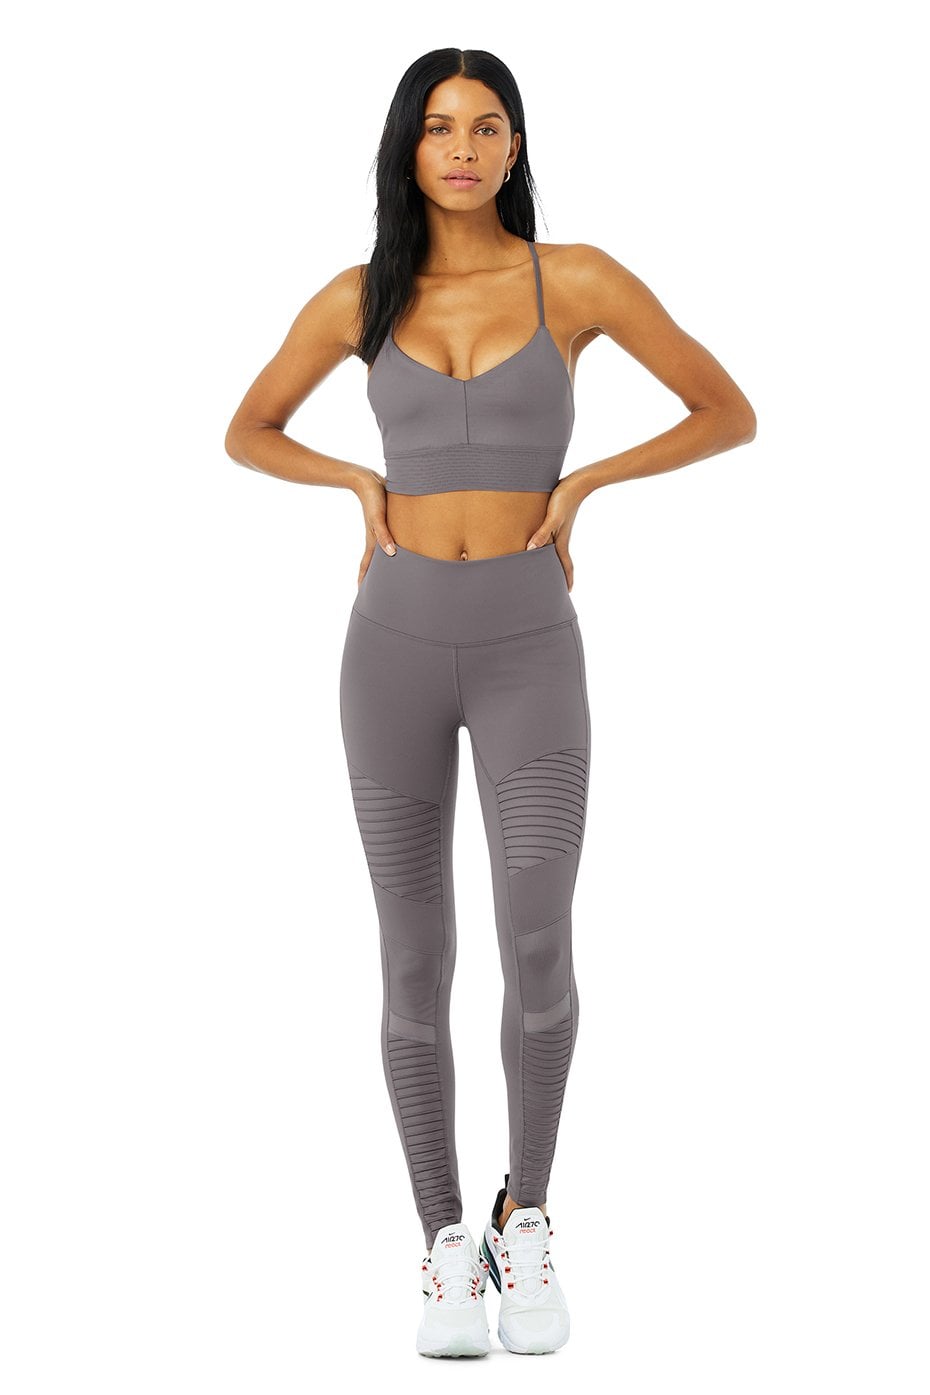 Alo Lavish Bra & High-Waist Moto Legging Set, Alo Has a Bunch of Cute Sets  You Can Both Work Out and Lounge In